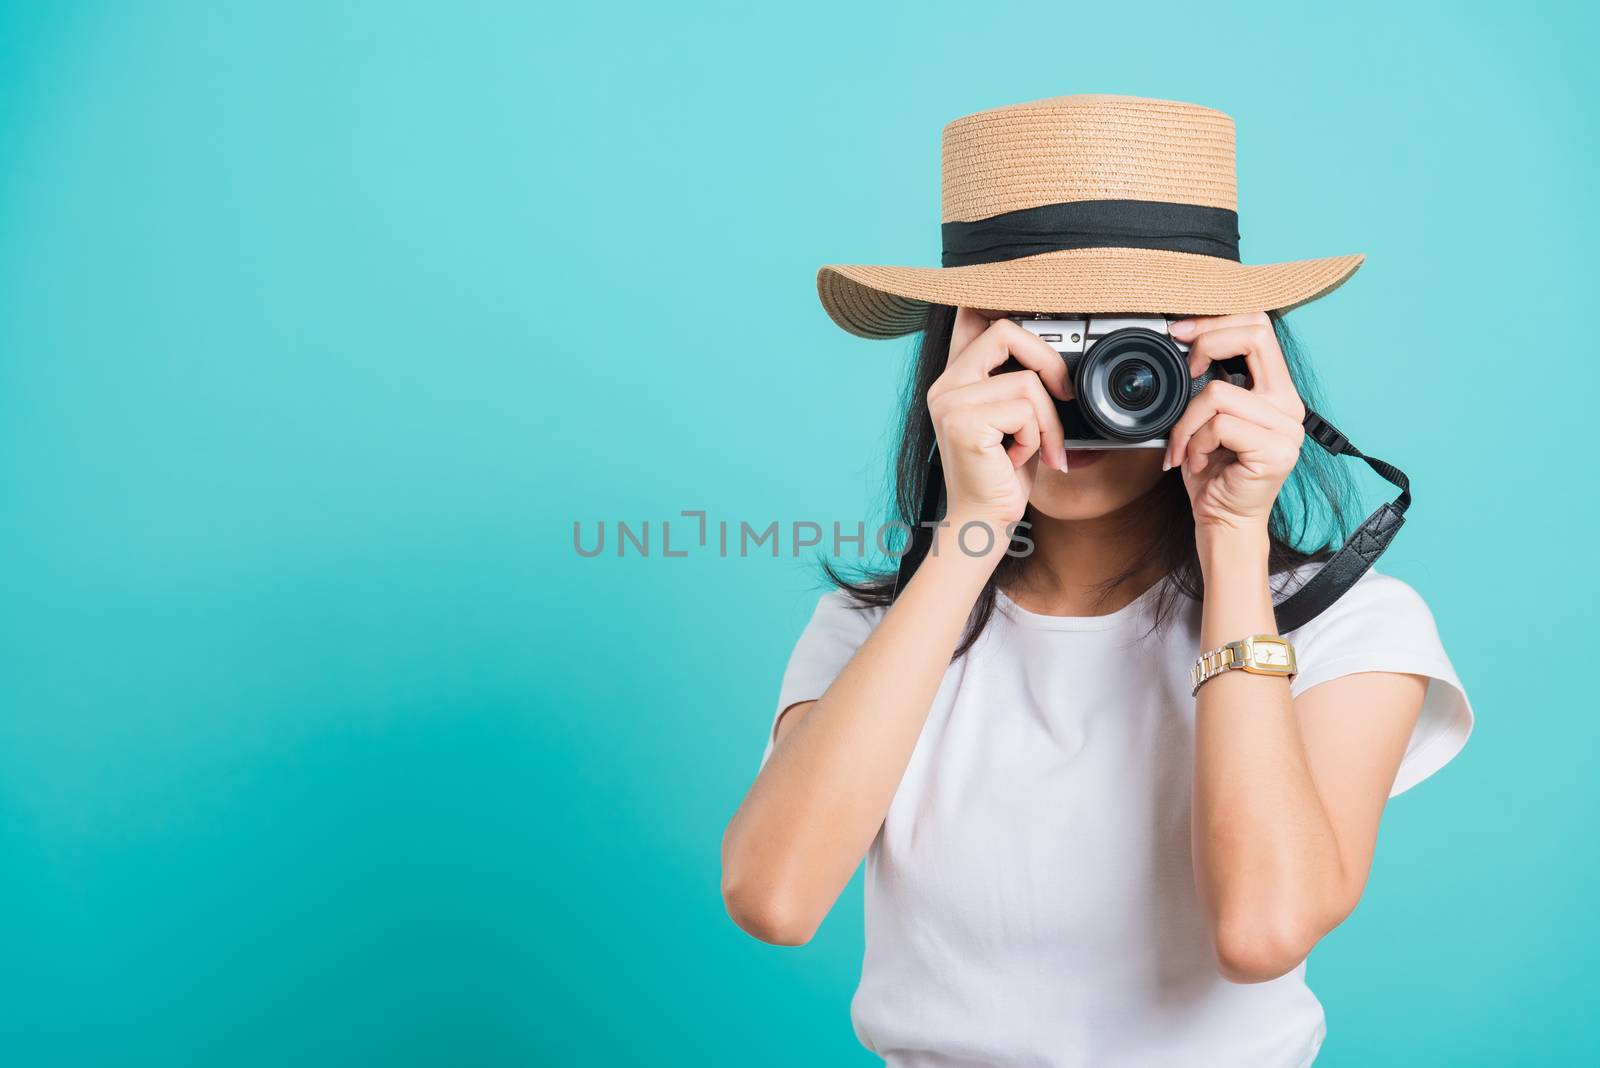 woman smile in summer hat standing with mirrorless photo camera by Sorapop